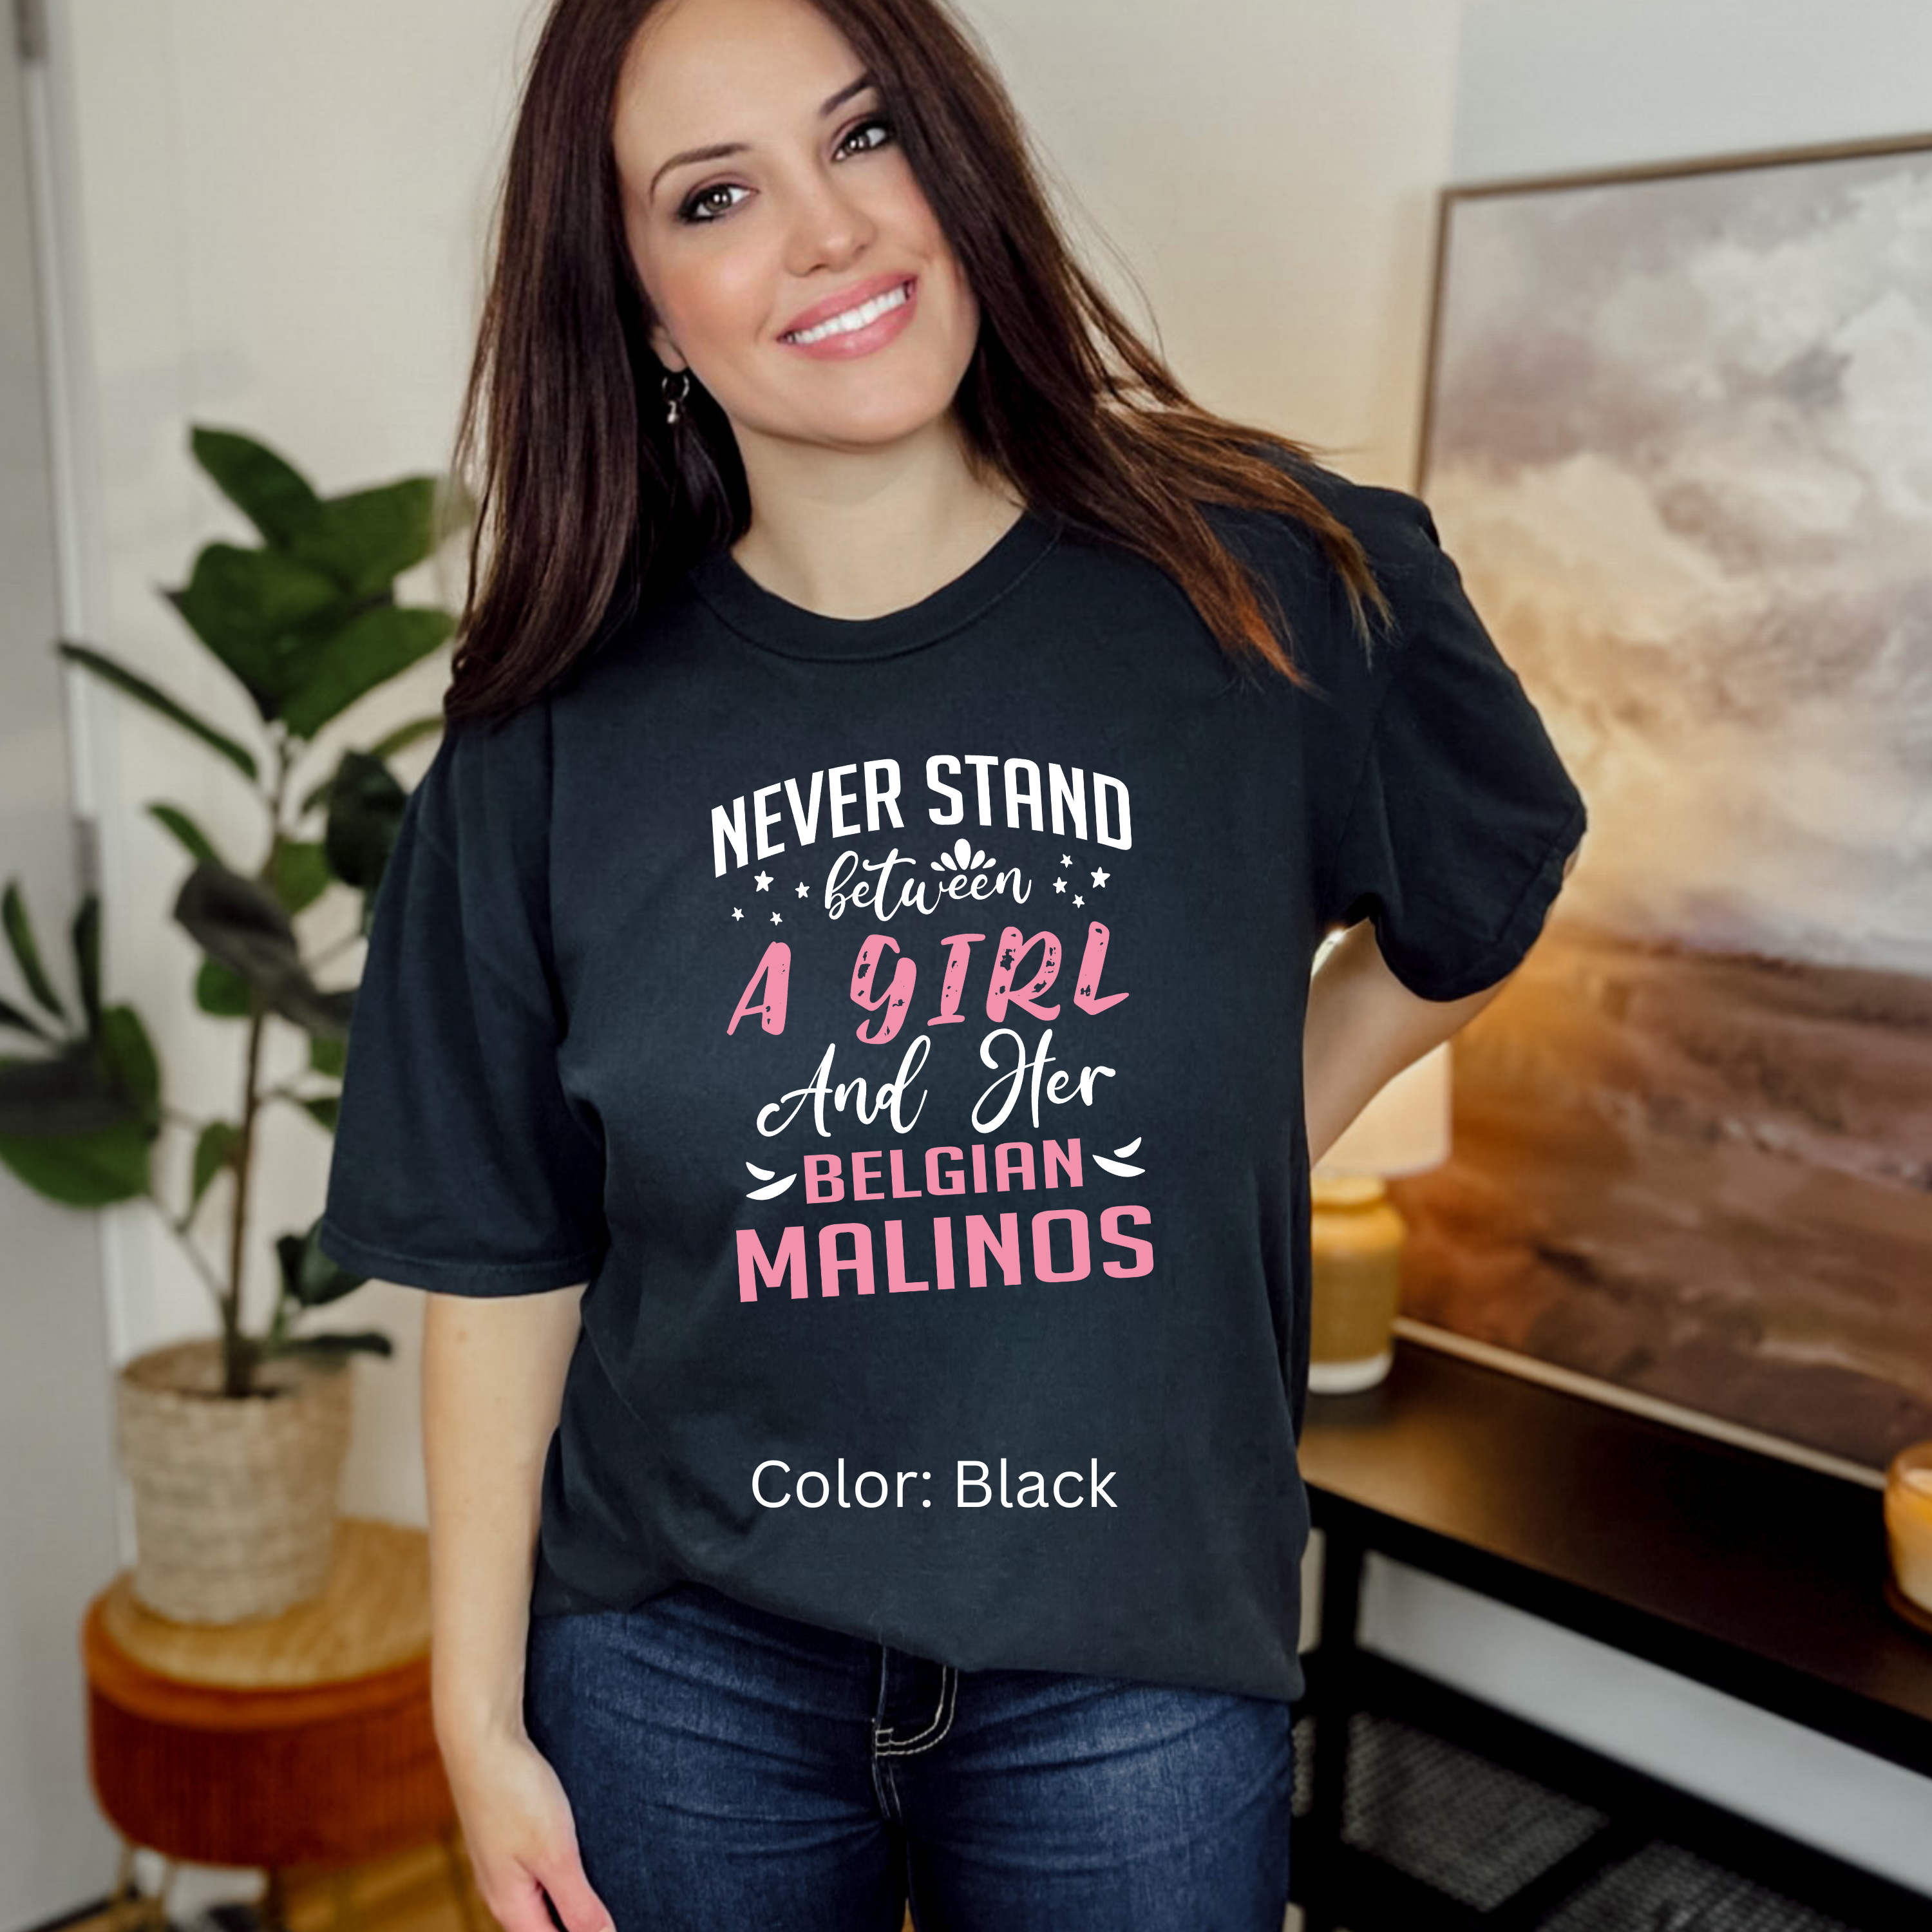 Never Stand Between a Girl and Her Malinois Comfort Colors Tee - Dog Lover Shirt